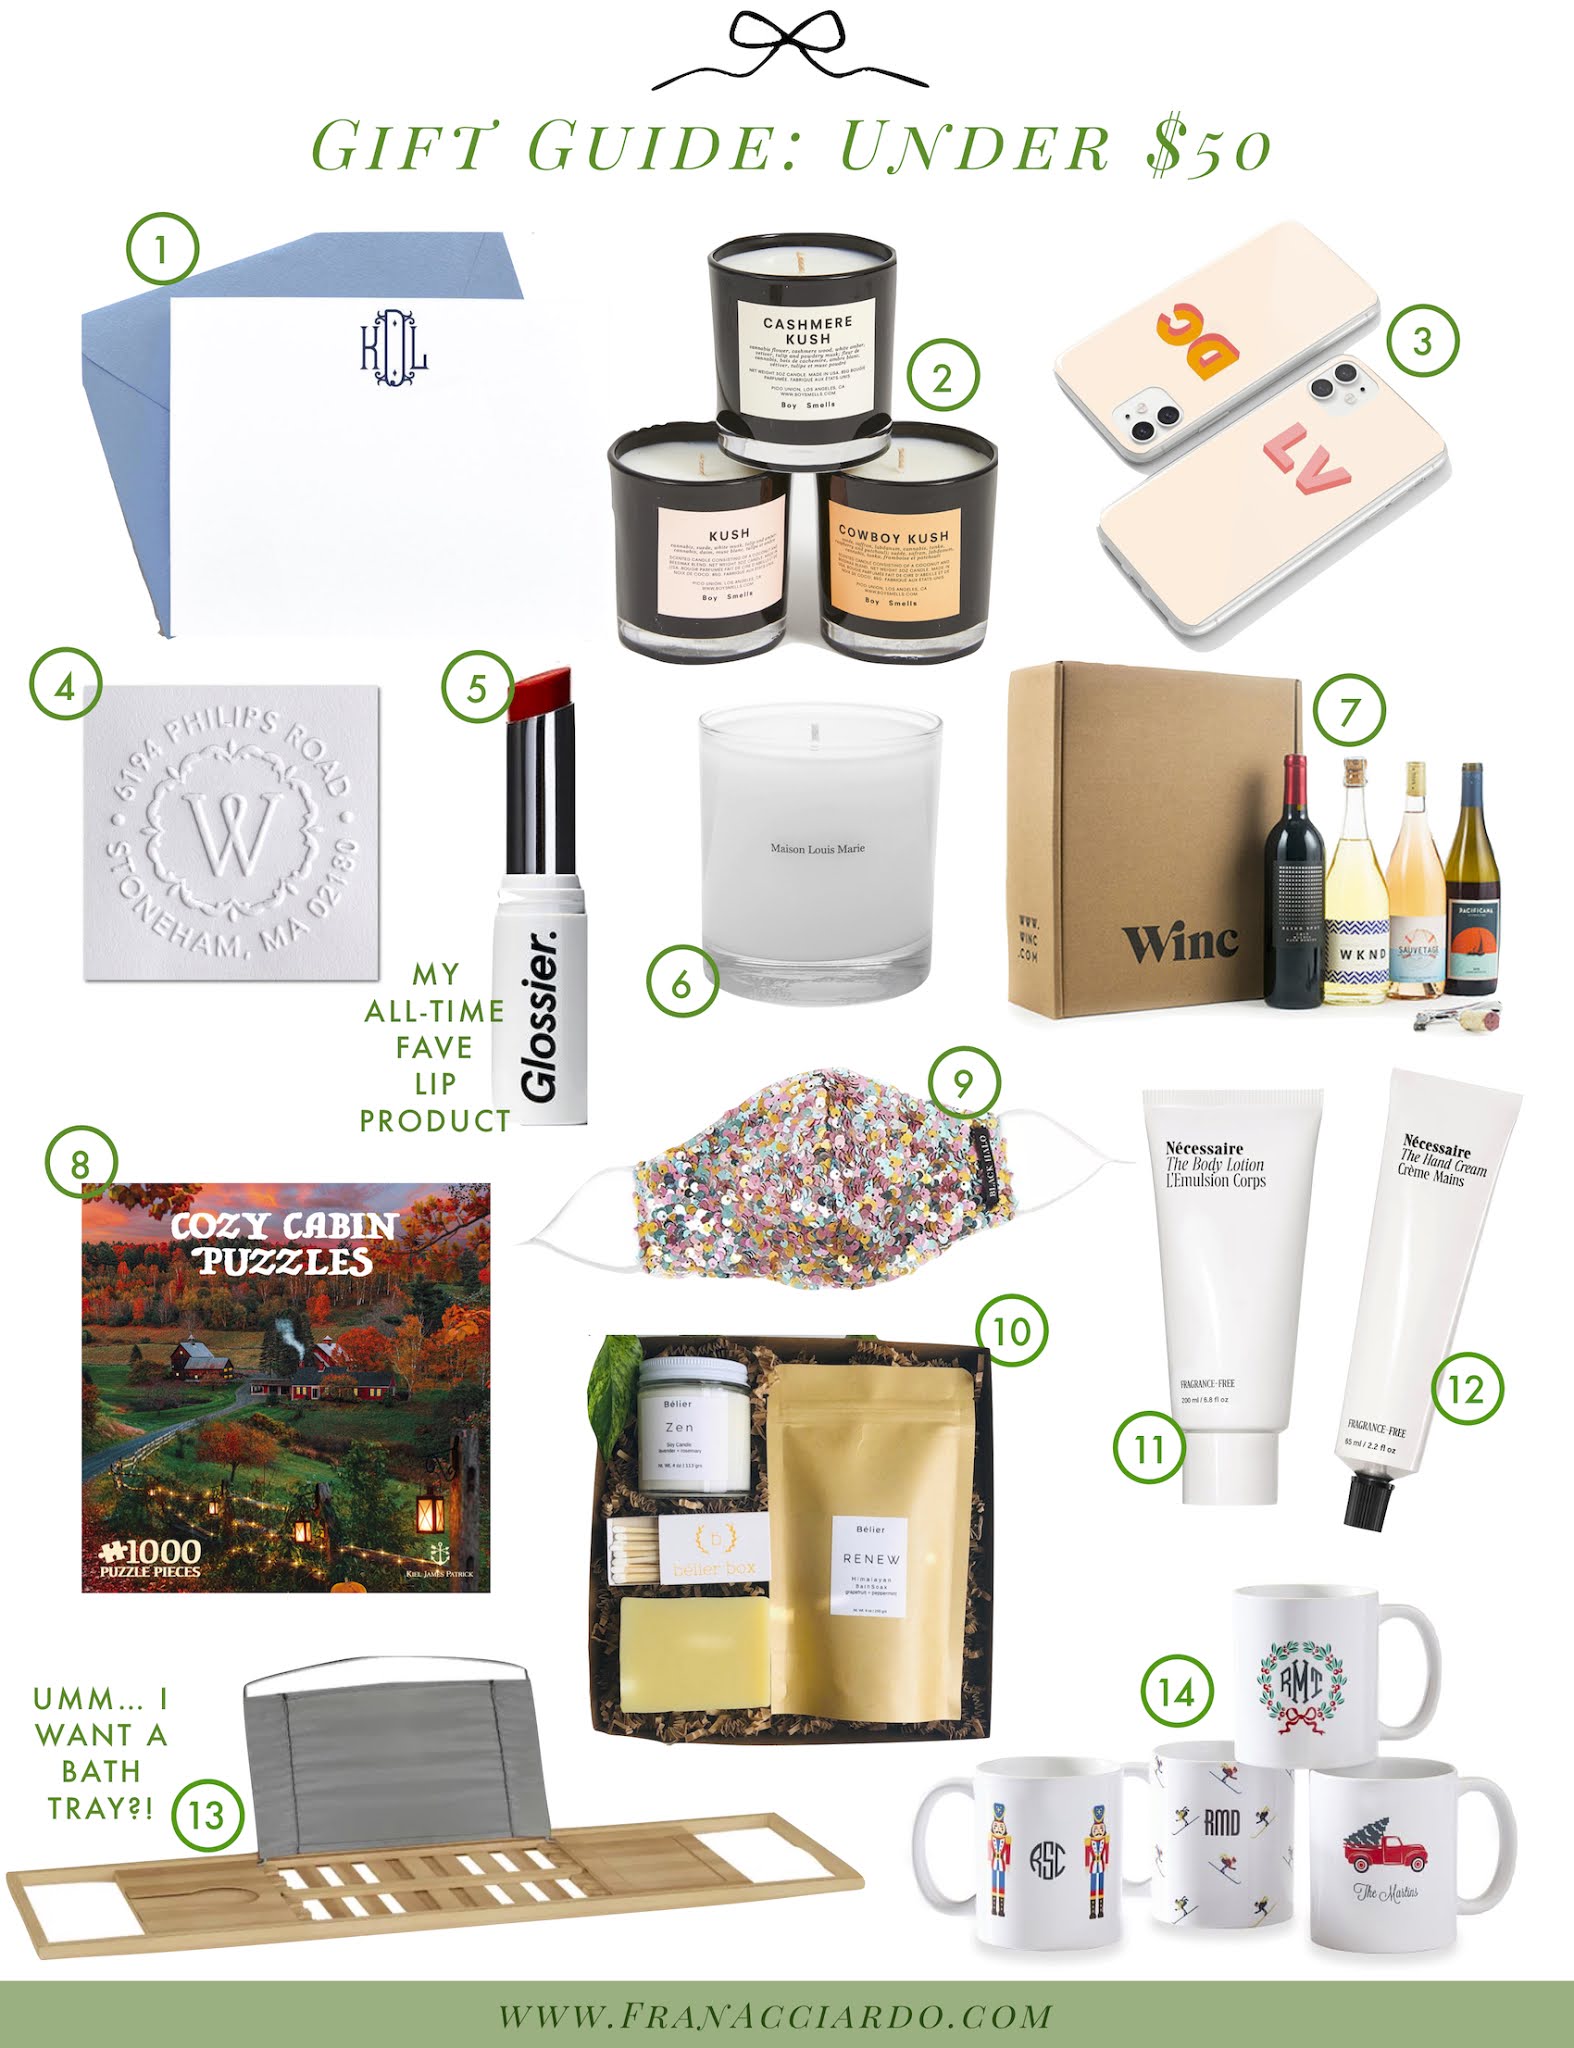 Just Give Your People Small Comforts: A 2020 Holiday Gift Guide